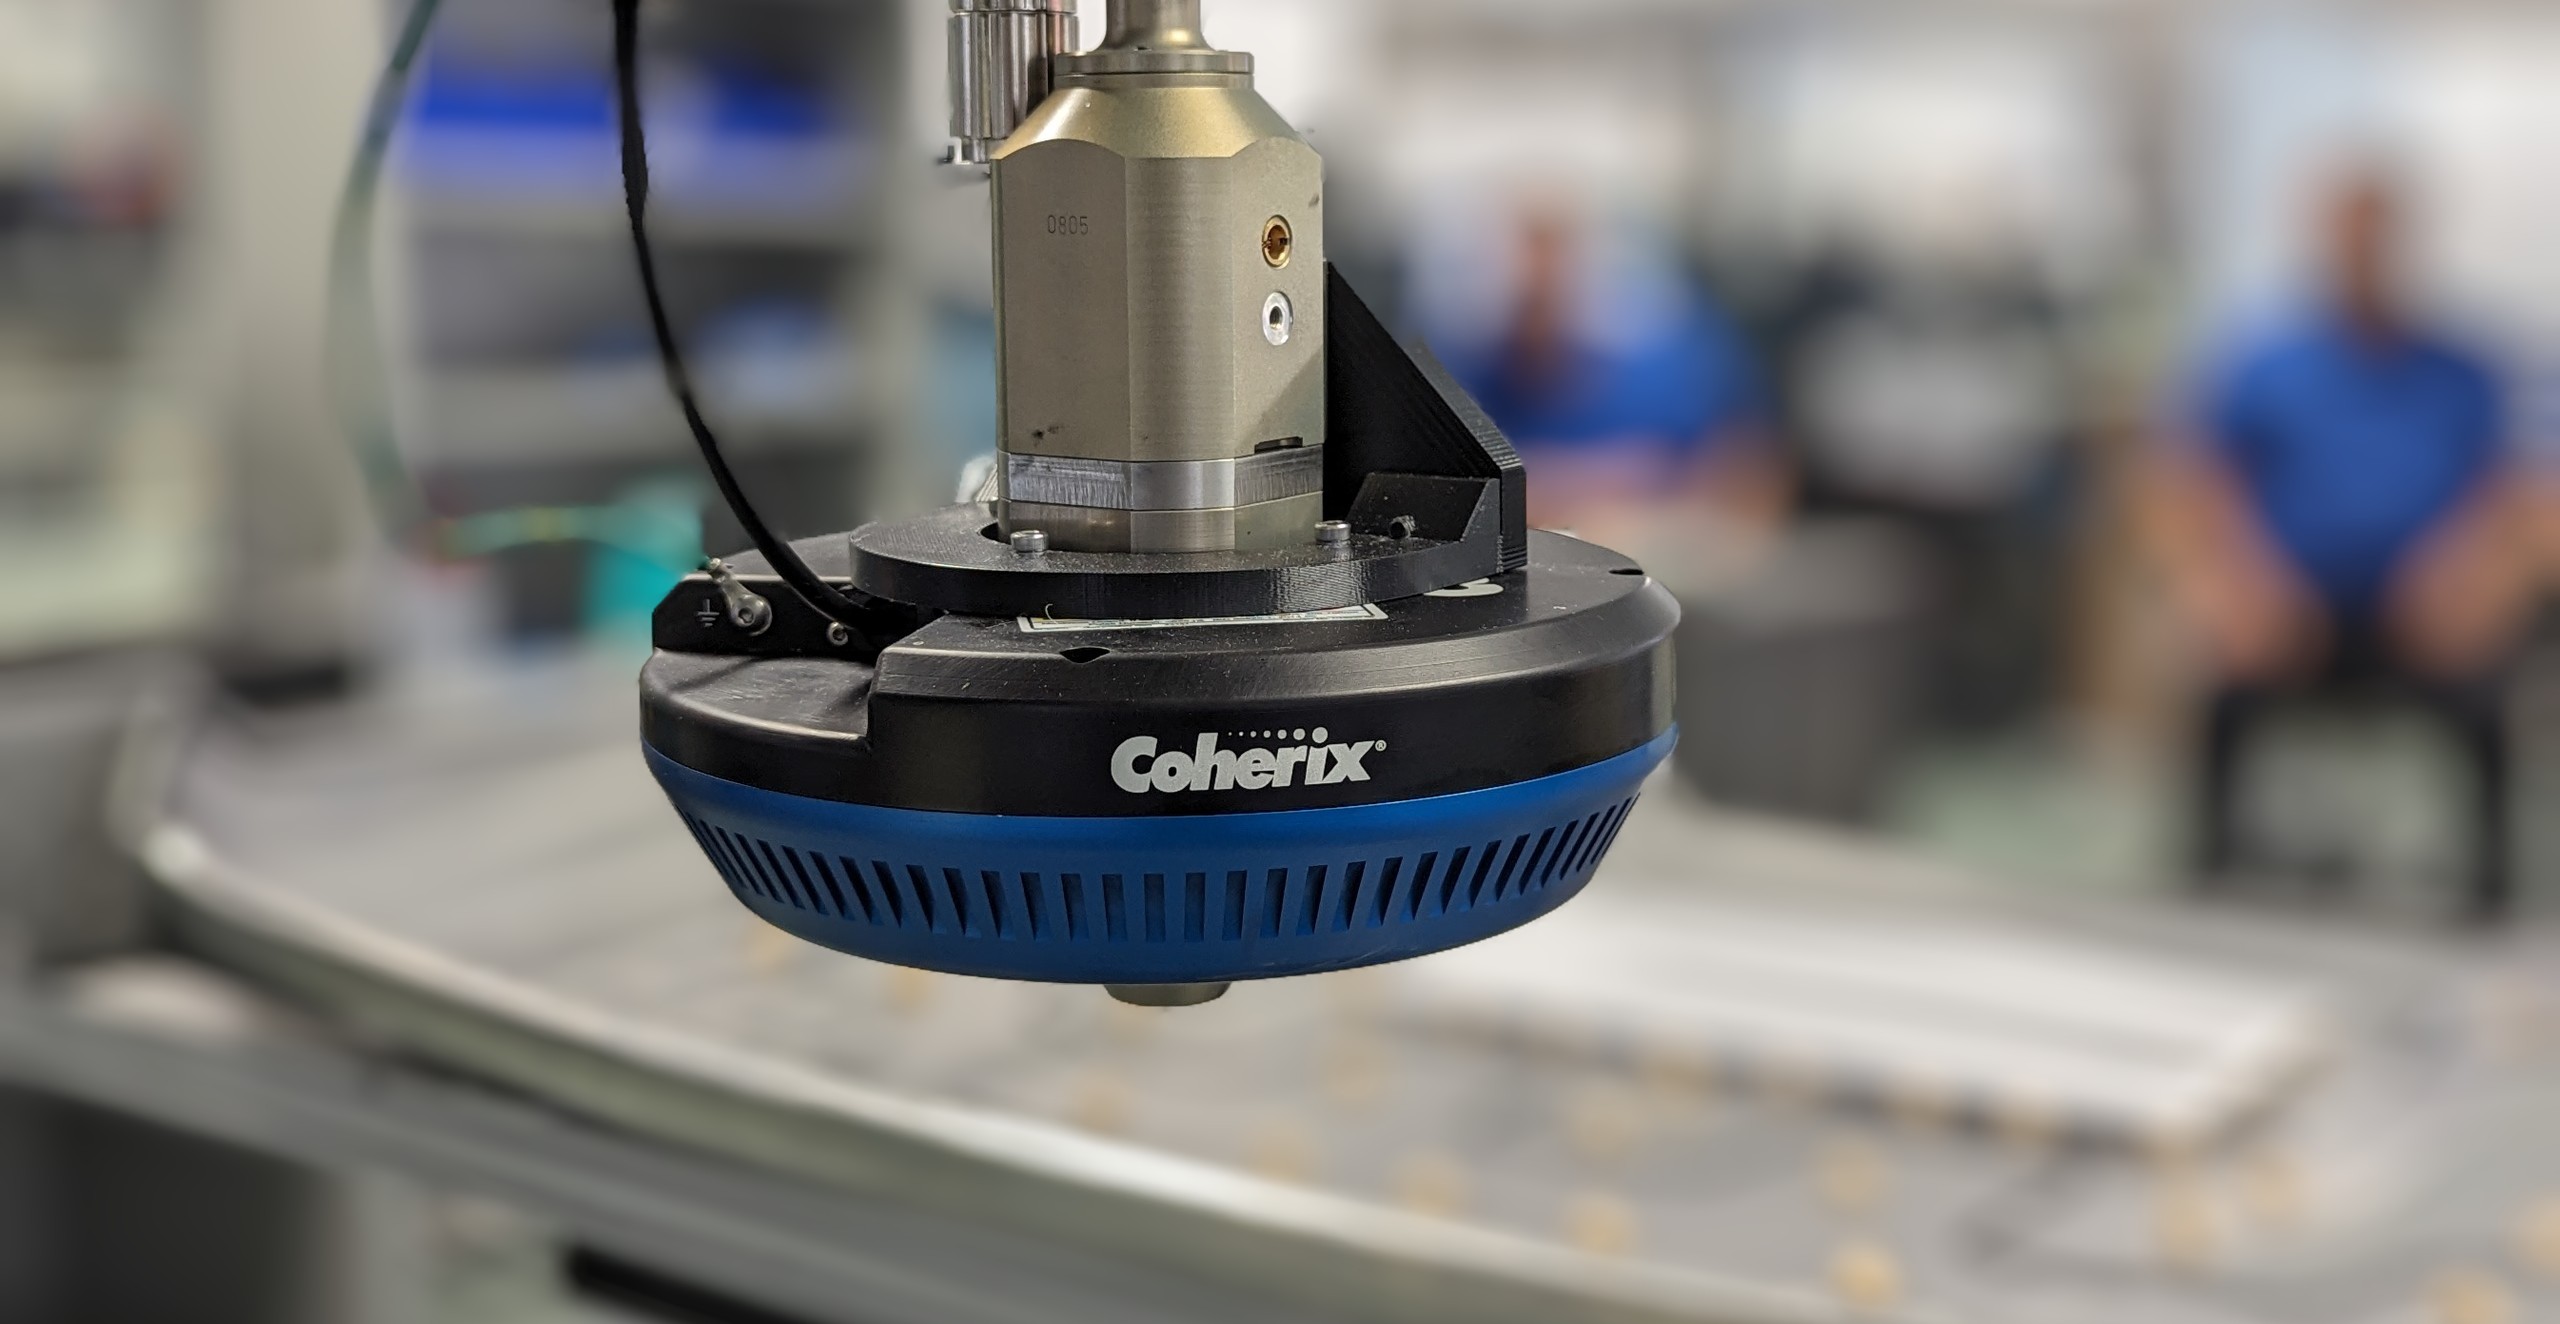 Coherix 3D is self-contained and mounts around the dispensing nozzle to provide a 360° view of the adhesive bead in any direction.